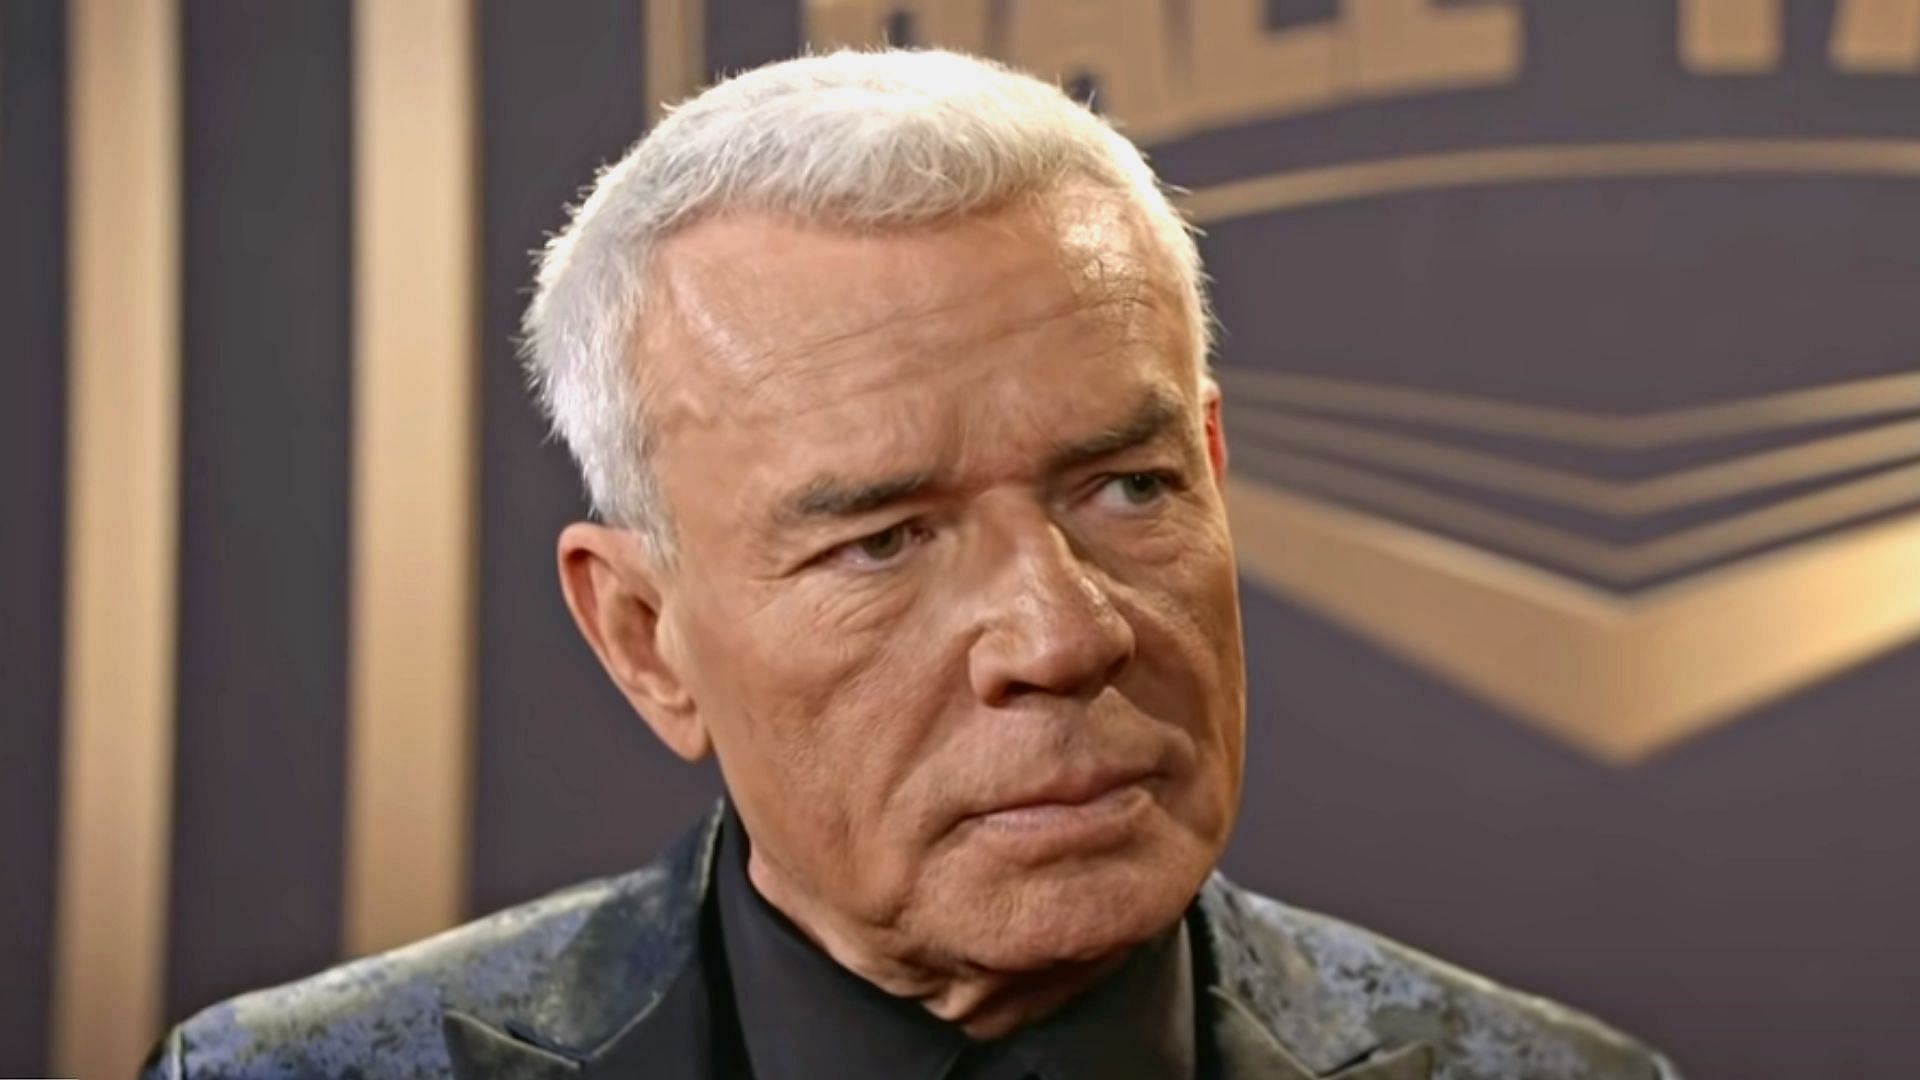 Eric Bischoff has been part of the wrestling industry for decades